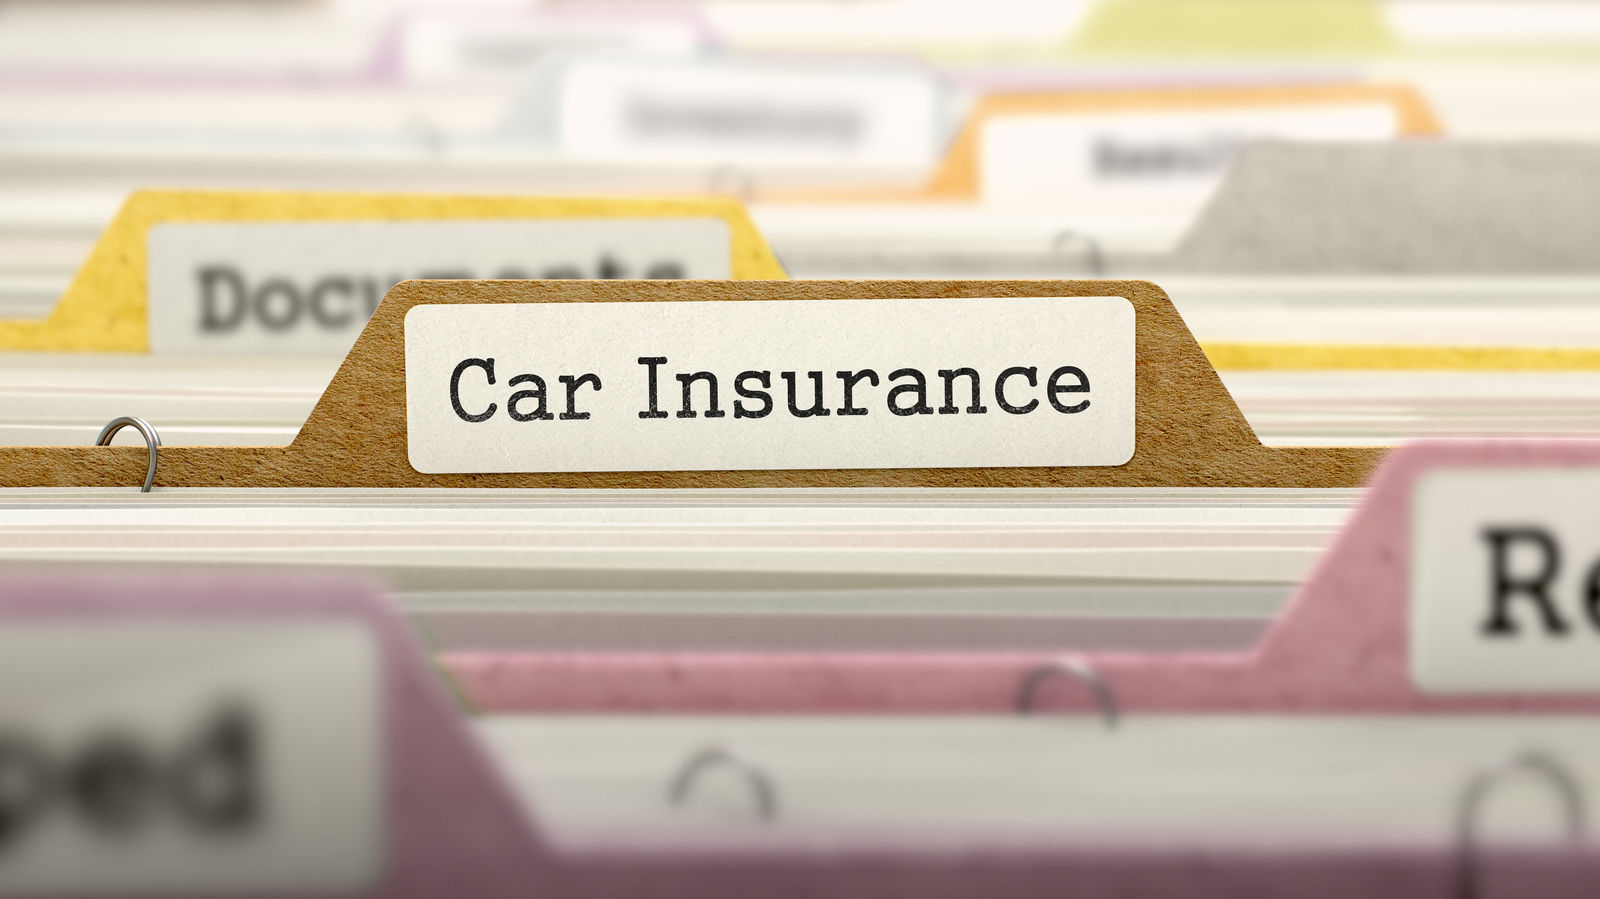 What do I need to get car insurance?